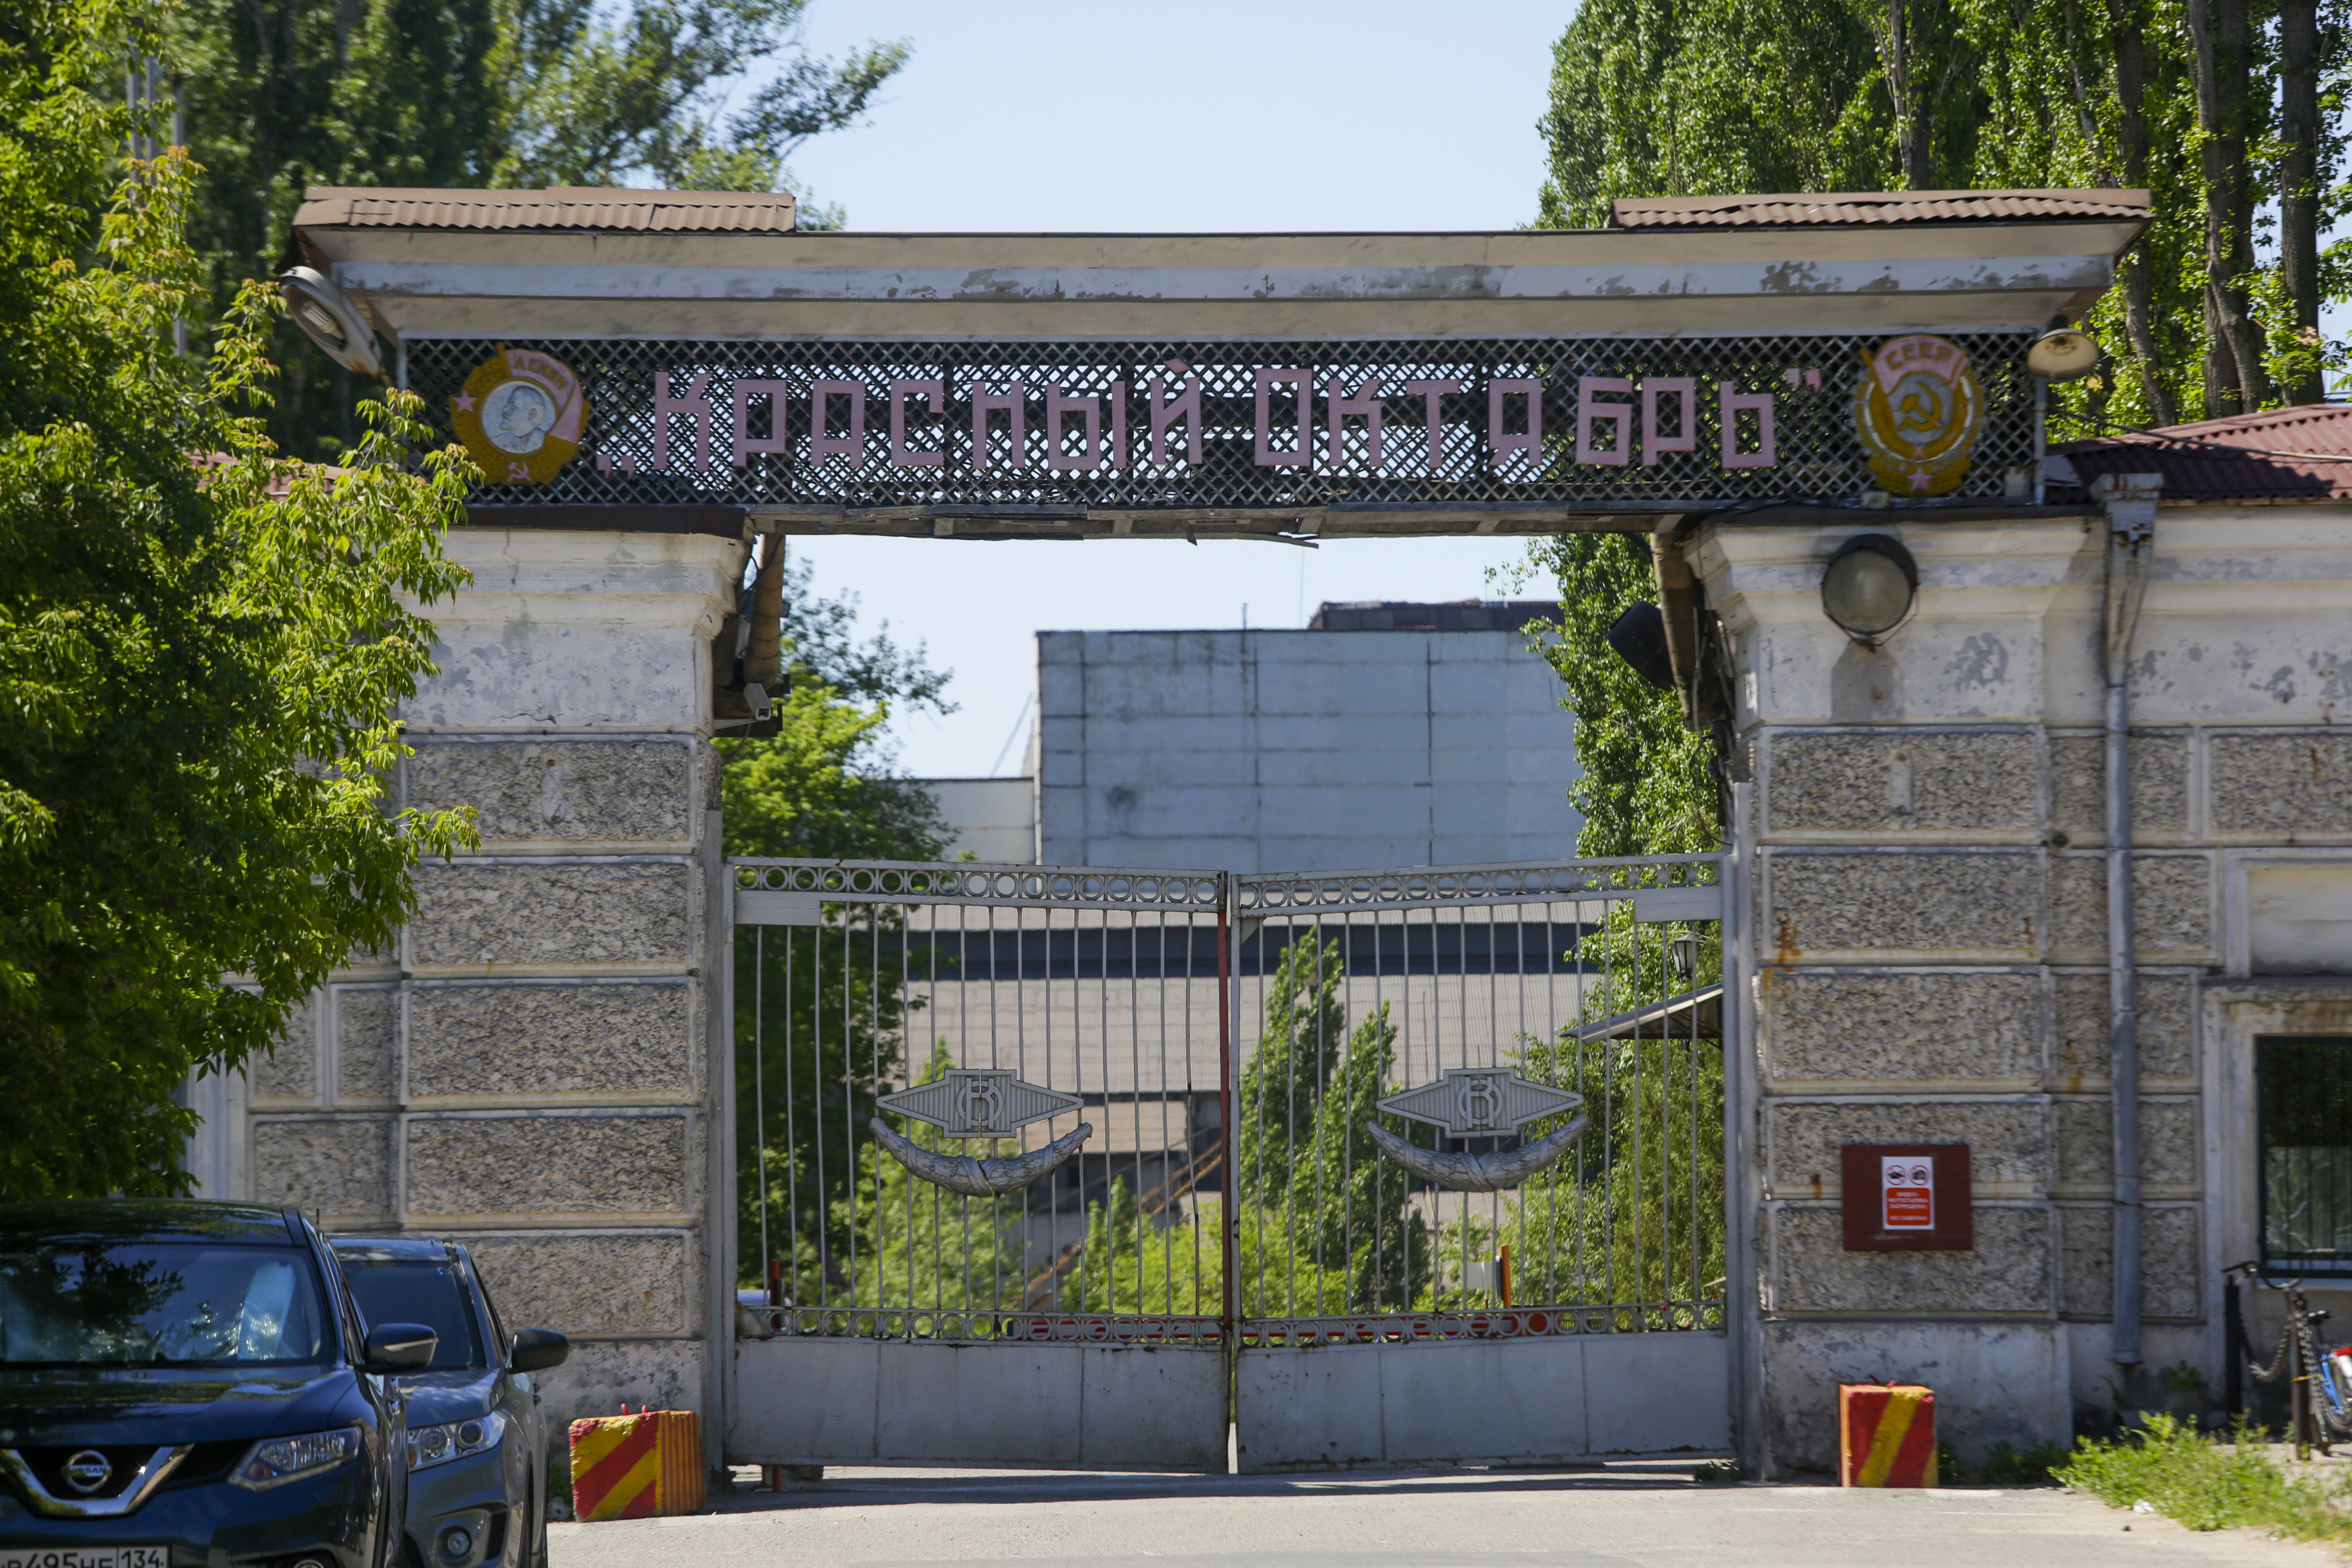 A gate at the Red October factory buildings in Volgograd